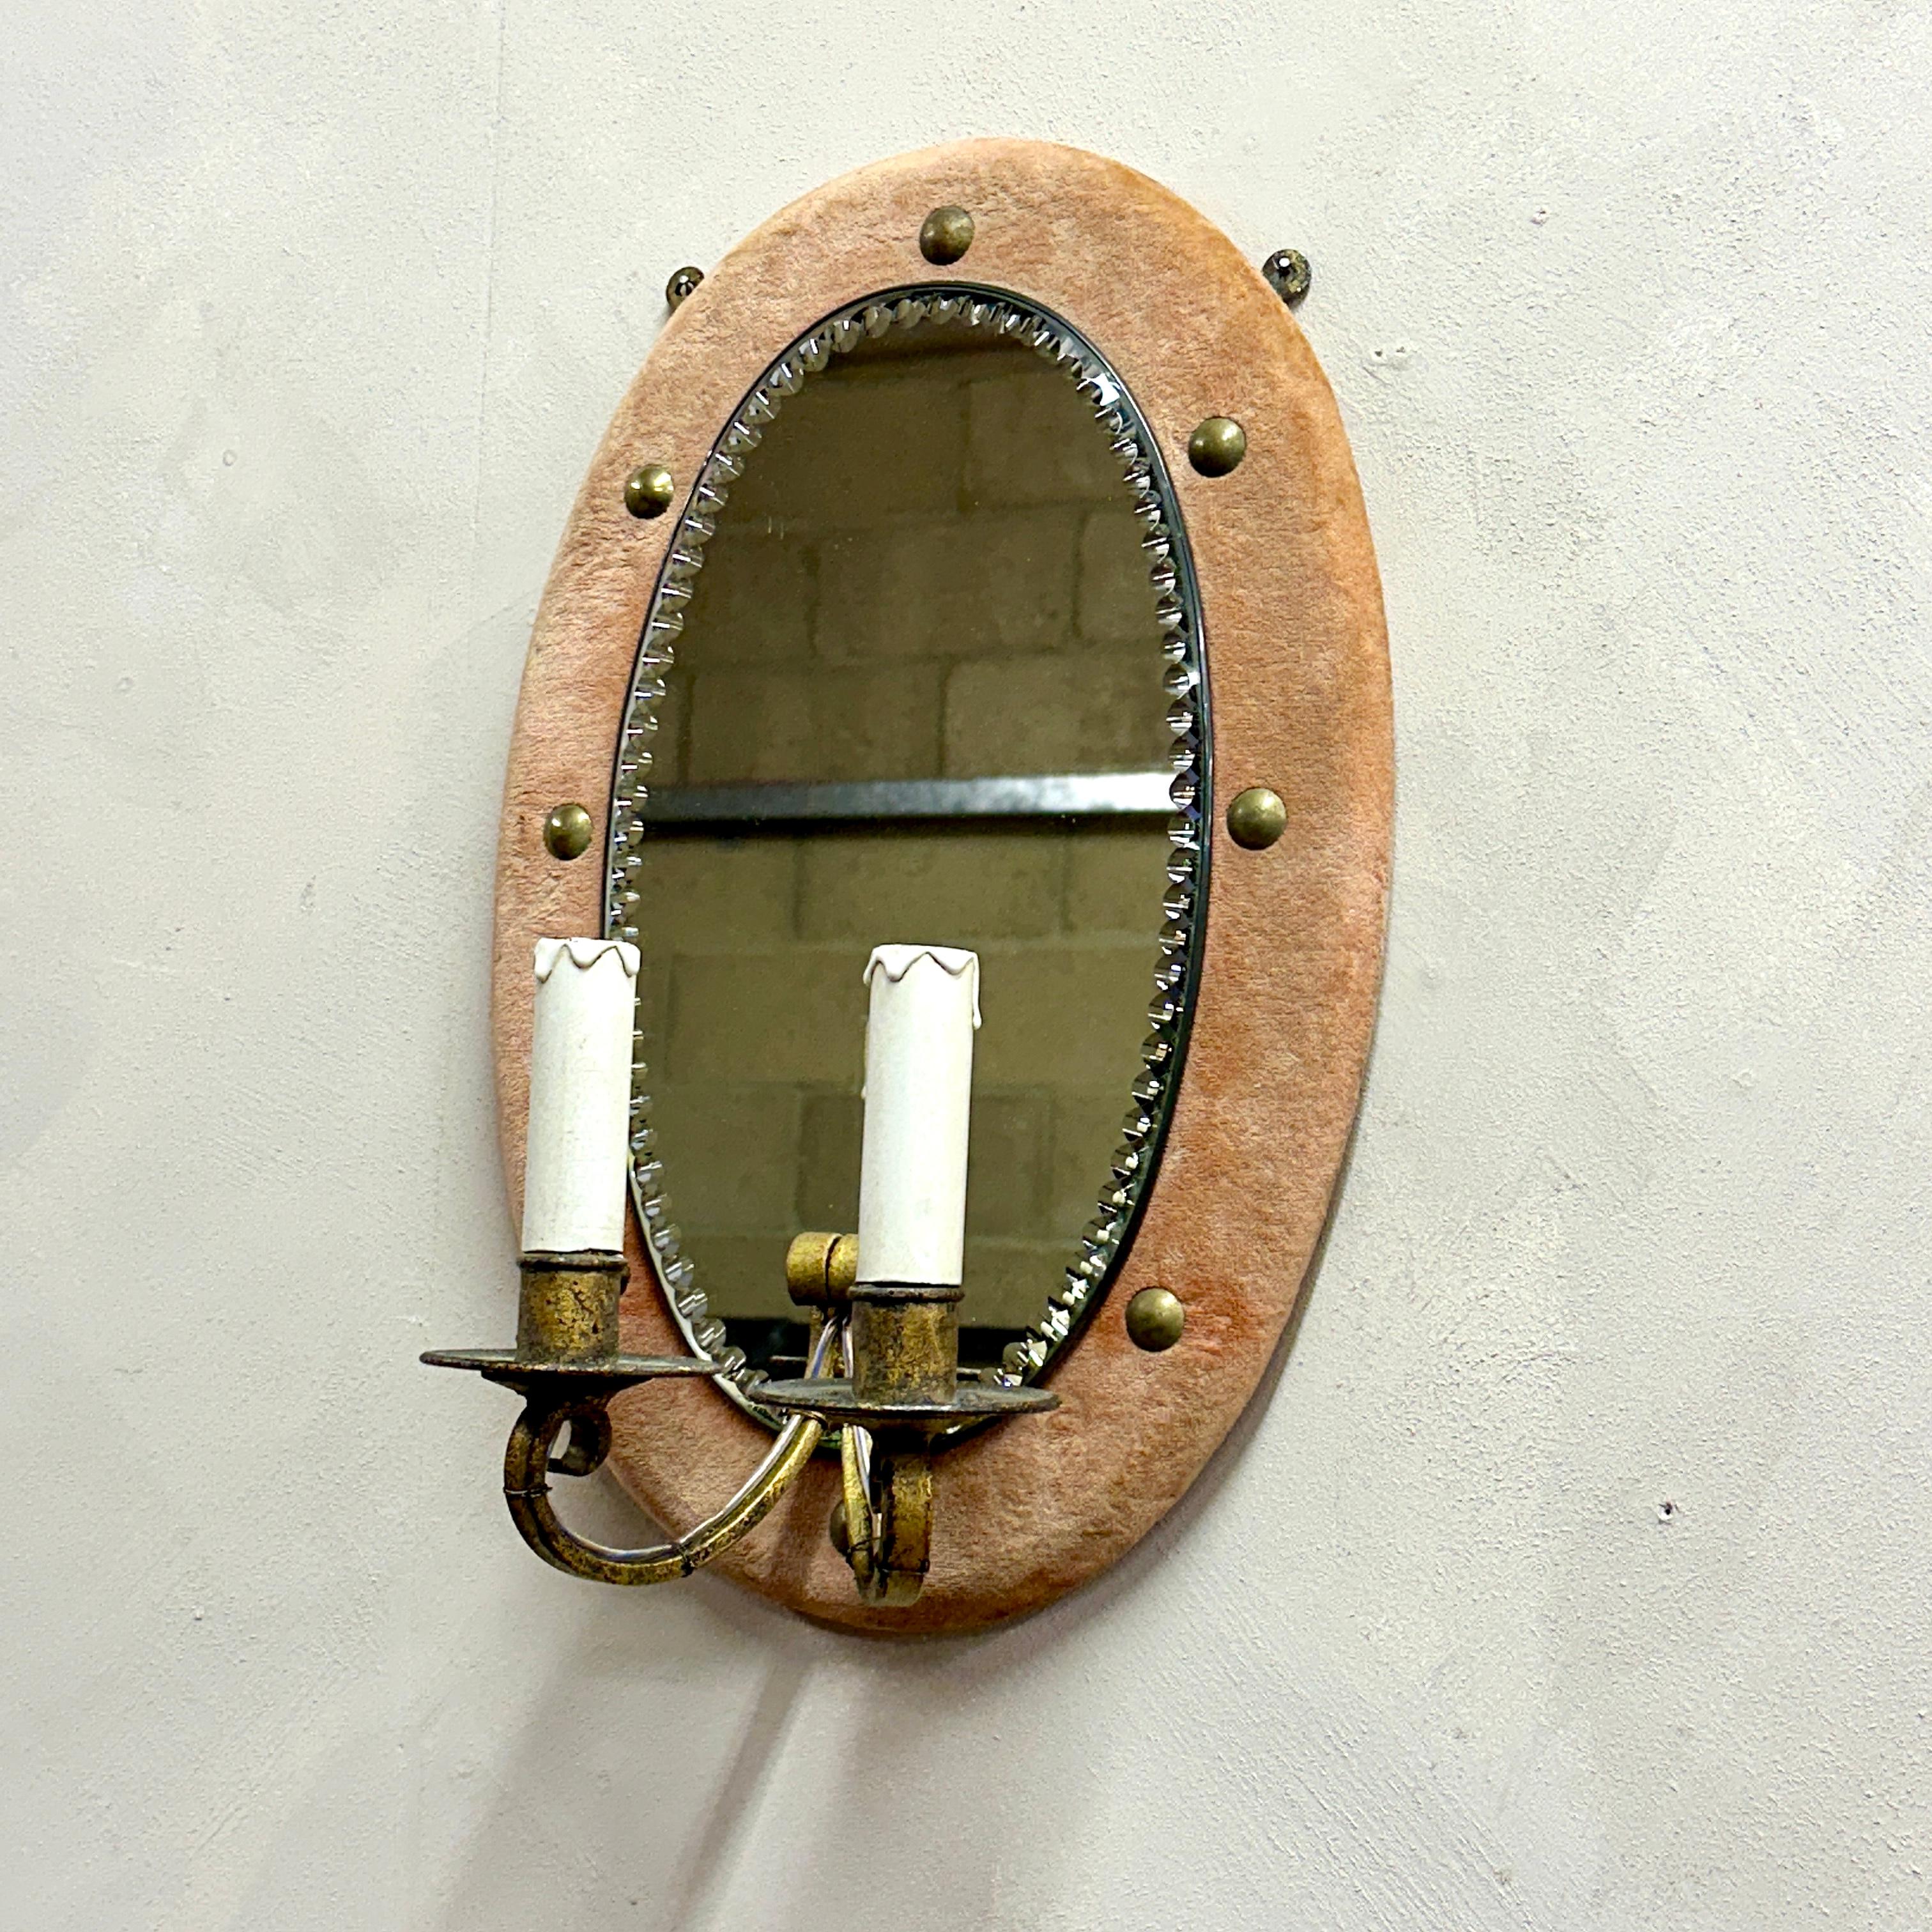 Oval bevelled mirror, cushioned in studded peach velvet.
With double faux candle sconce,  wired, PAT tested and ready to be installed on a wall.

Height: 46cm, Width: 30cm, Depth: 17cm.

Please message if any further info or photos are required 

We